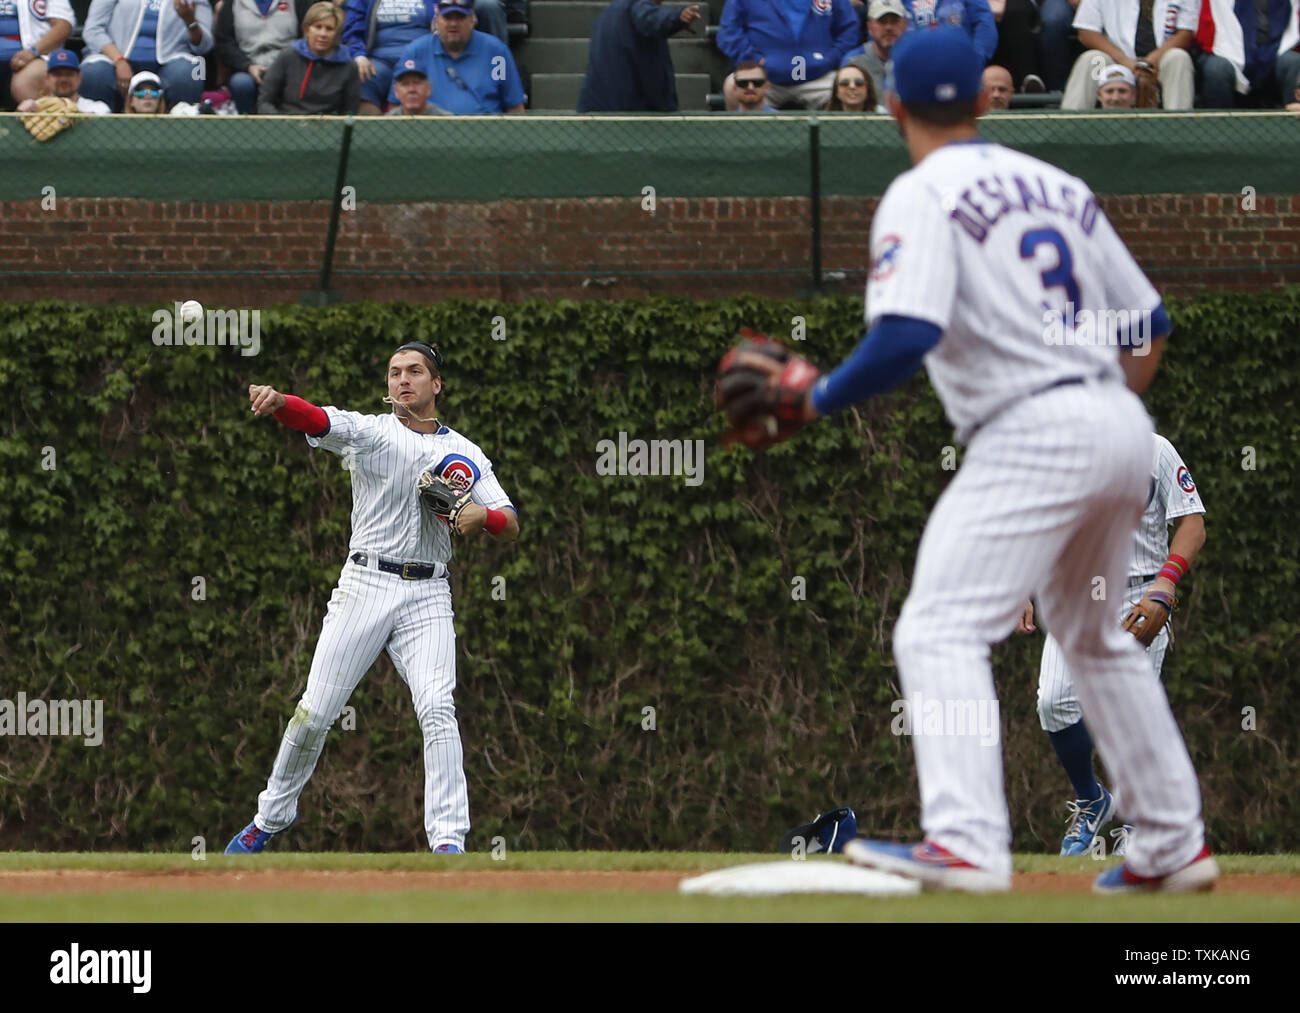 Chicago Cubs' Albert Almora Jr. (L) throws the ball to Daniel Descalso (R) against the Cincinnati Reds in the fourth inning at Wrigley Field on May 24, 2019 in Chicago. Photo by Kamil Krzaczynski/UPI Stock Photo